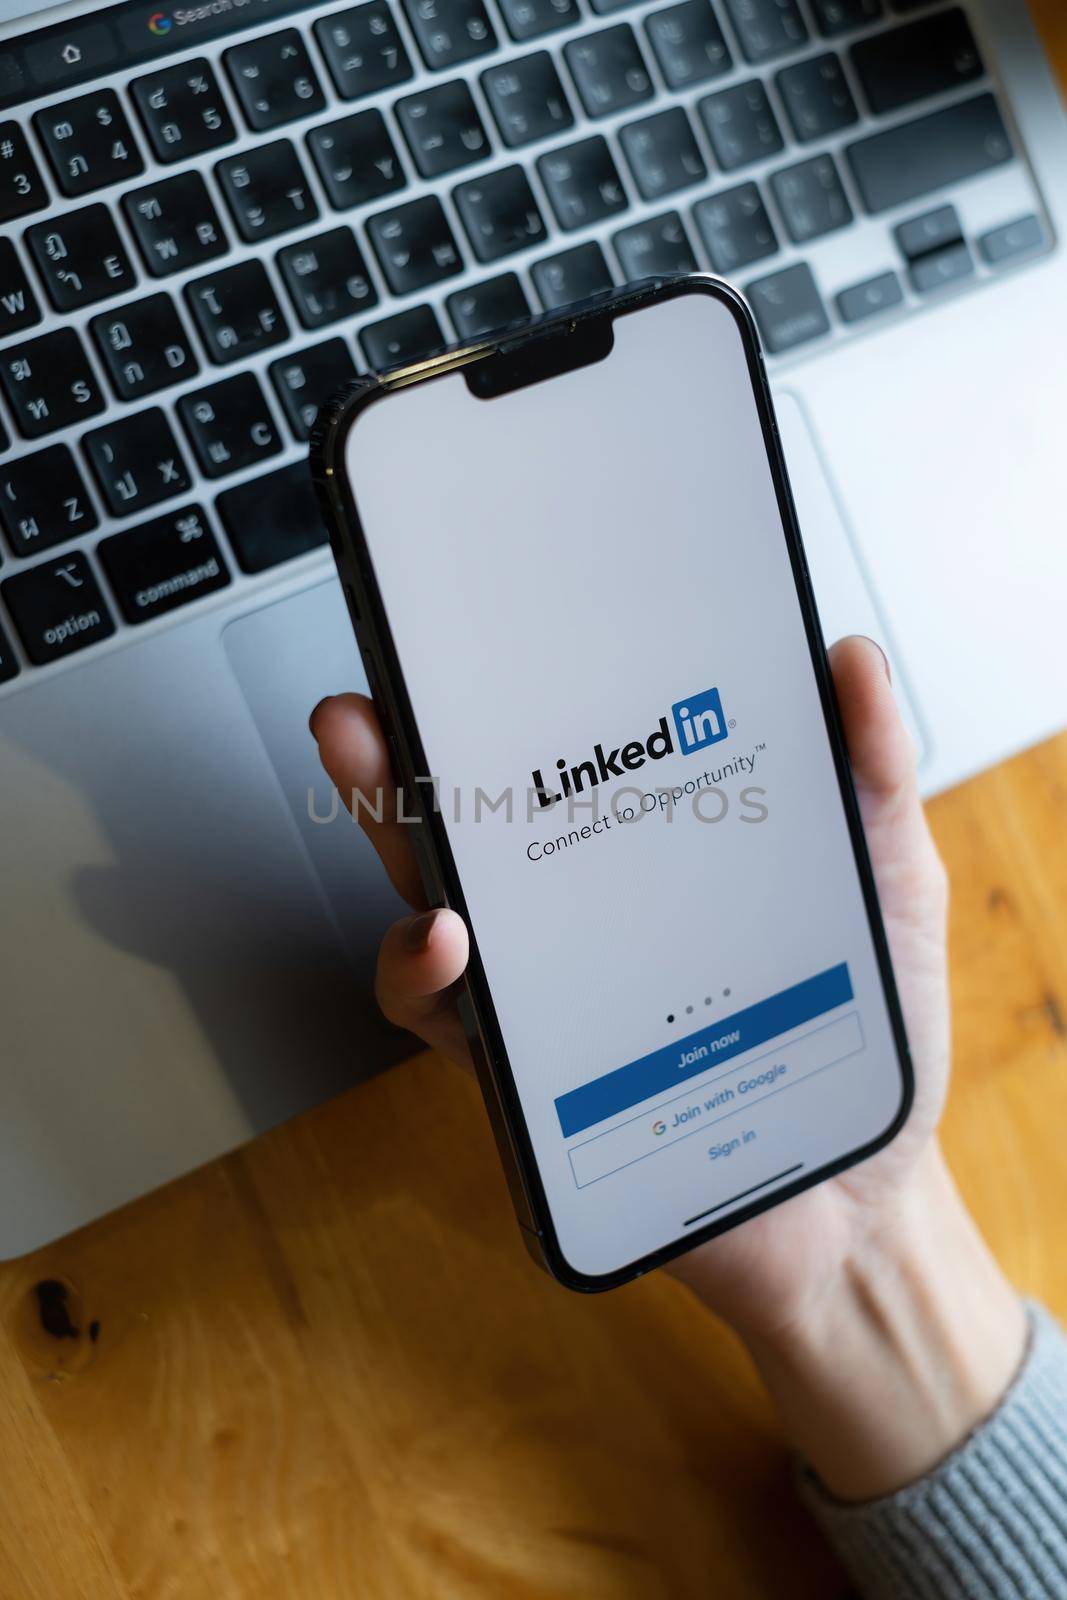 CHIANG MAI, THAILAND: OCT 18, 2021: LinkedIn logo on phone screen. LinkedIn is a social network for search and establishment of business contacts. It is founded in 2002